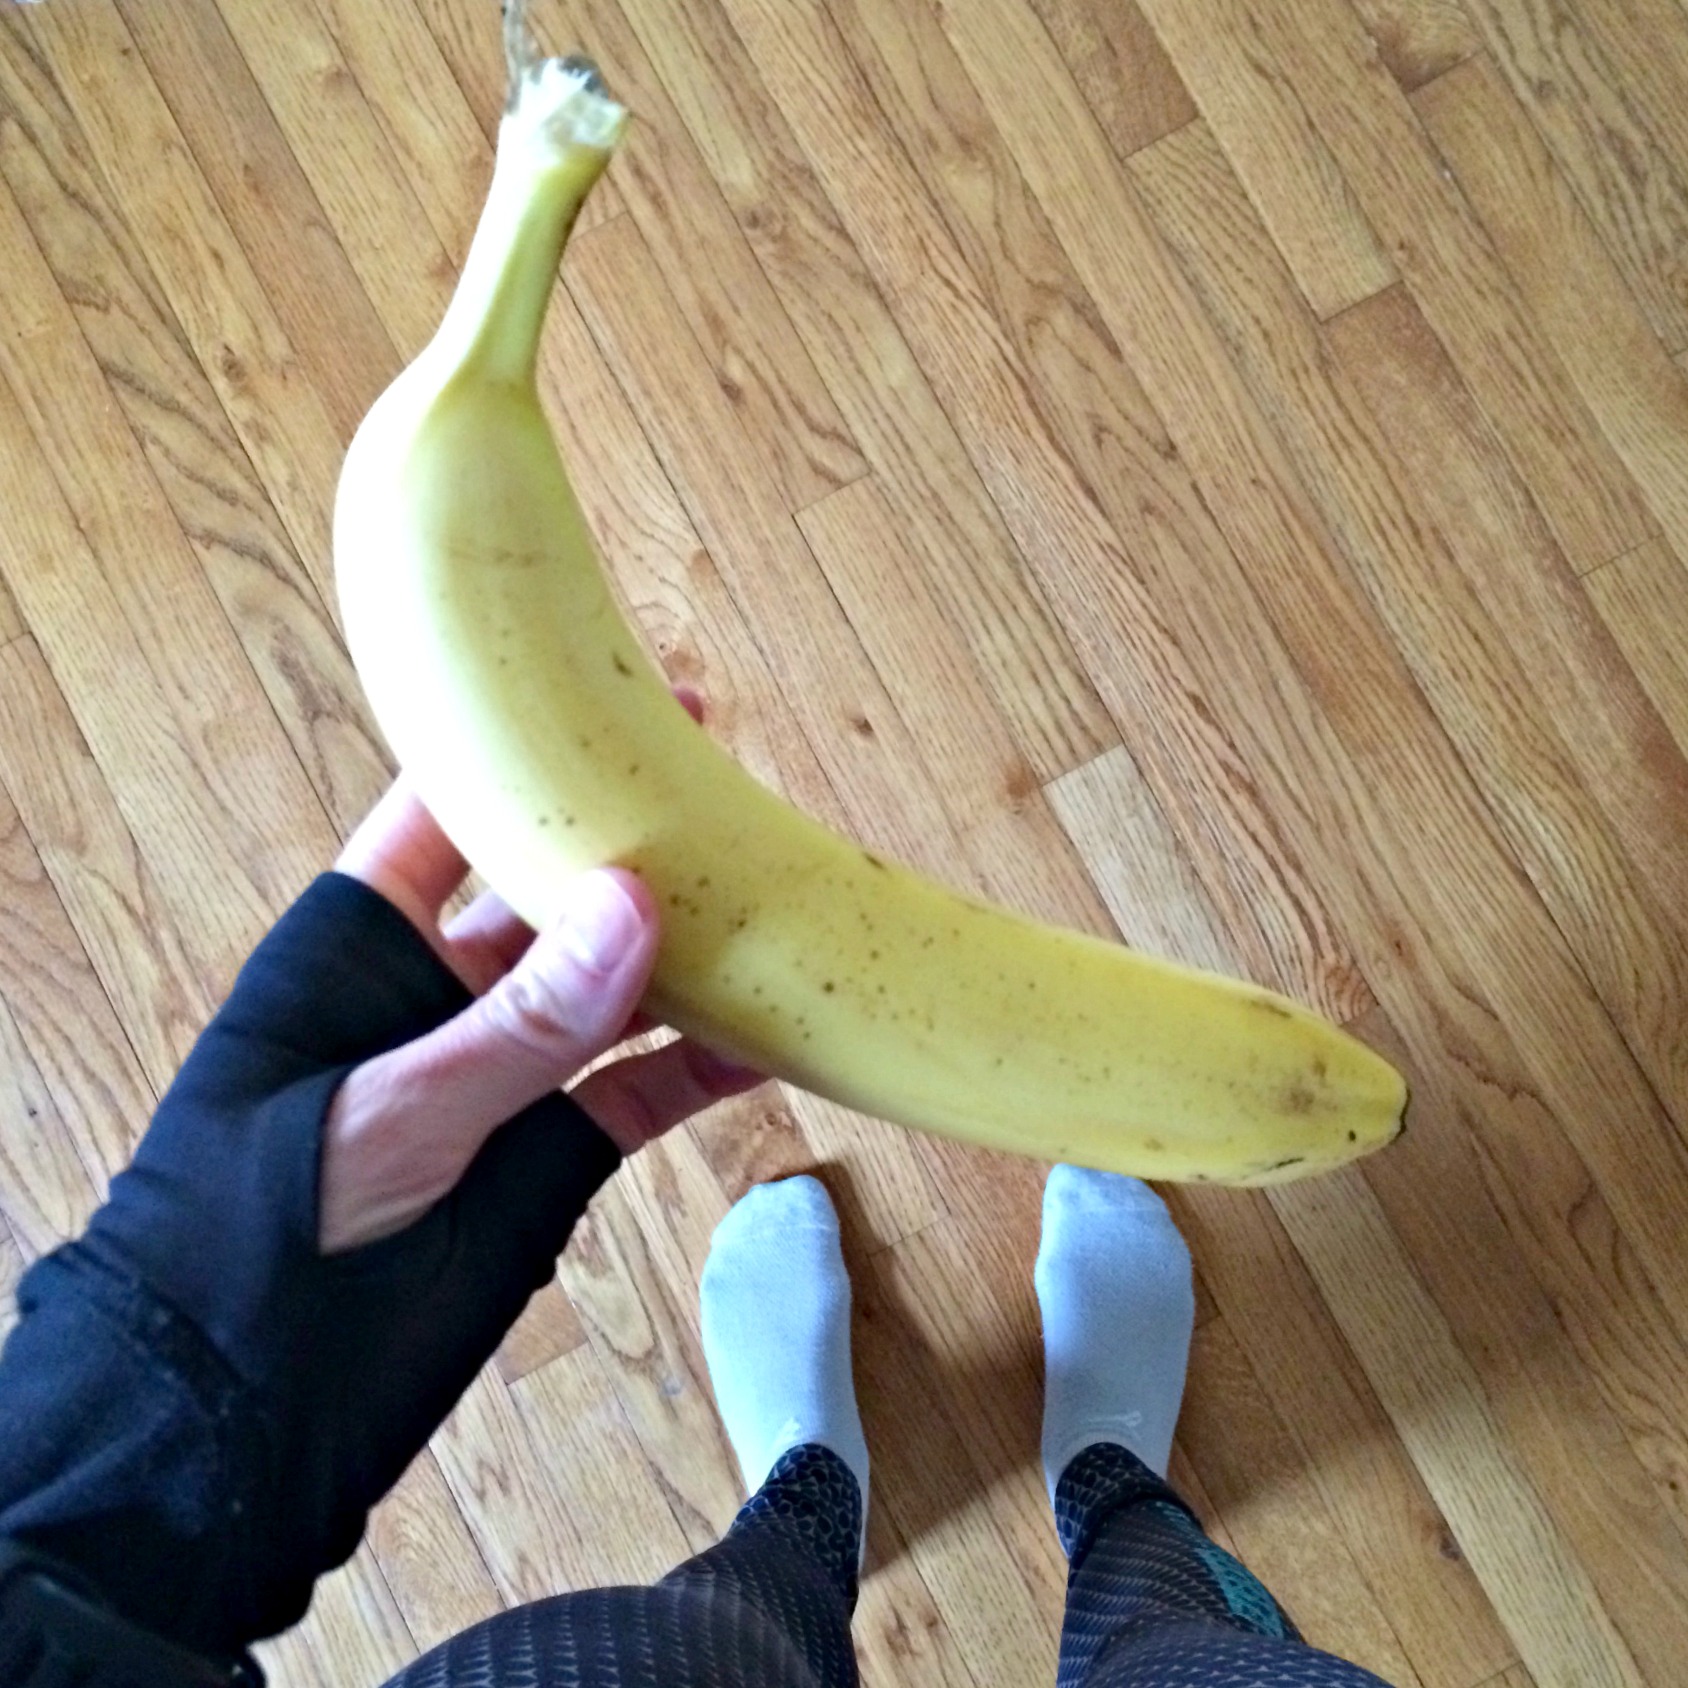 banana for a snack